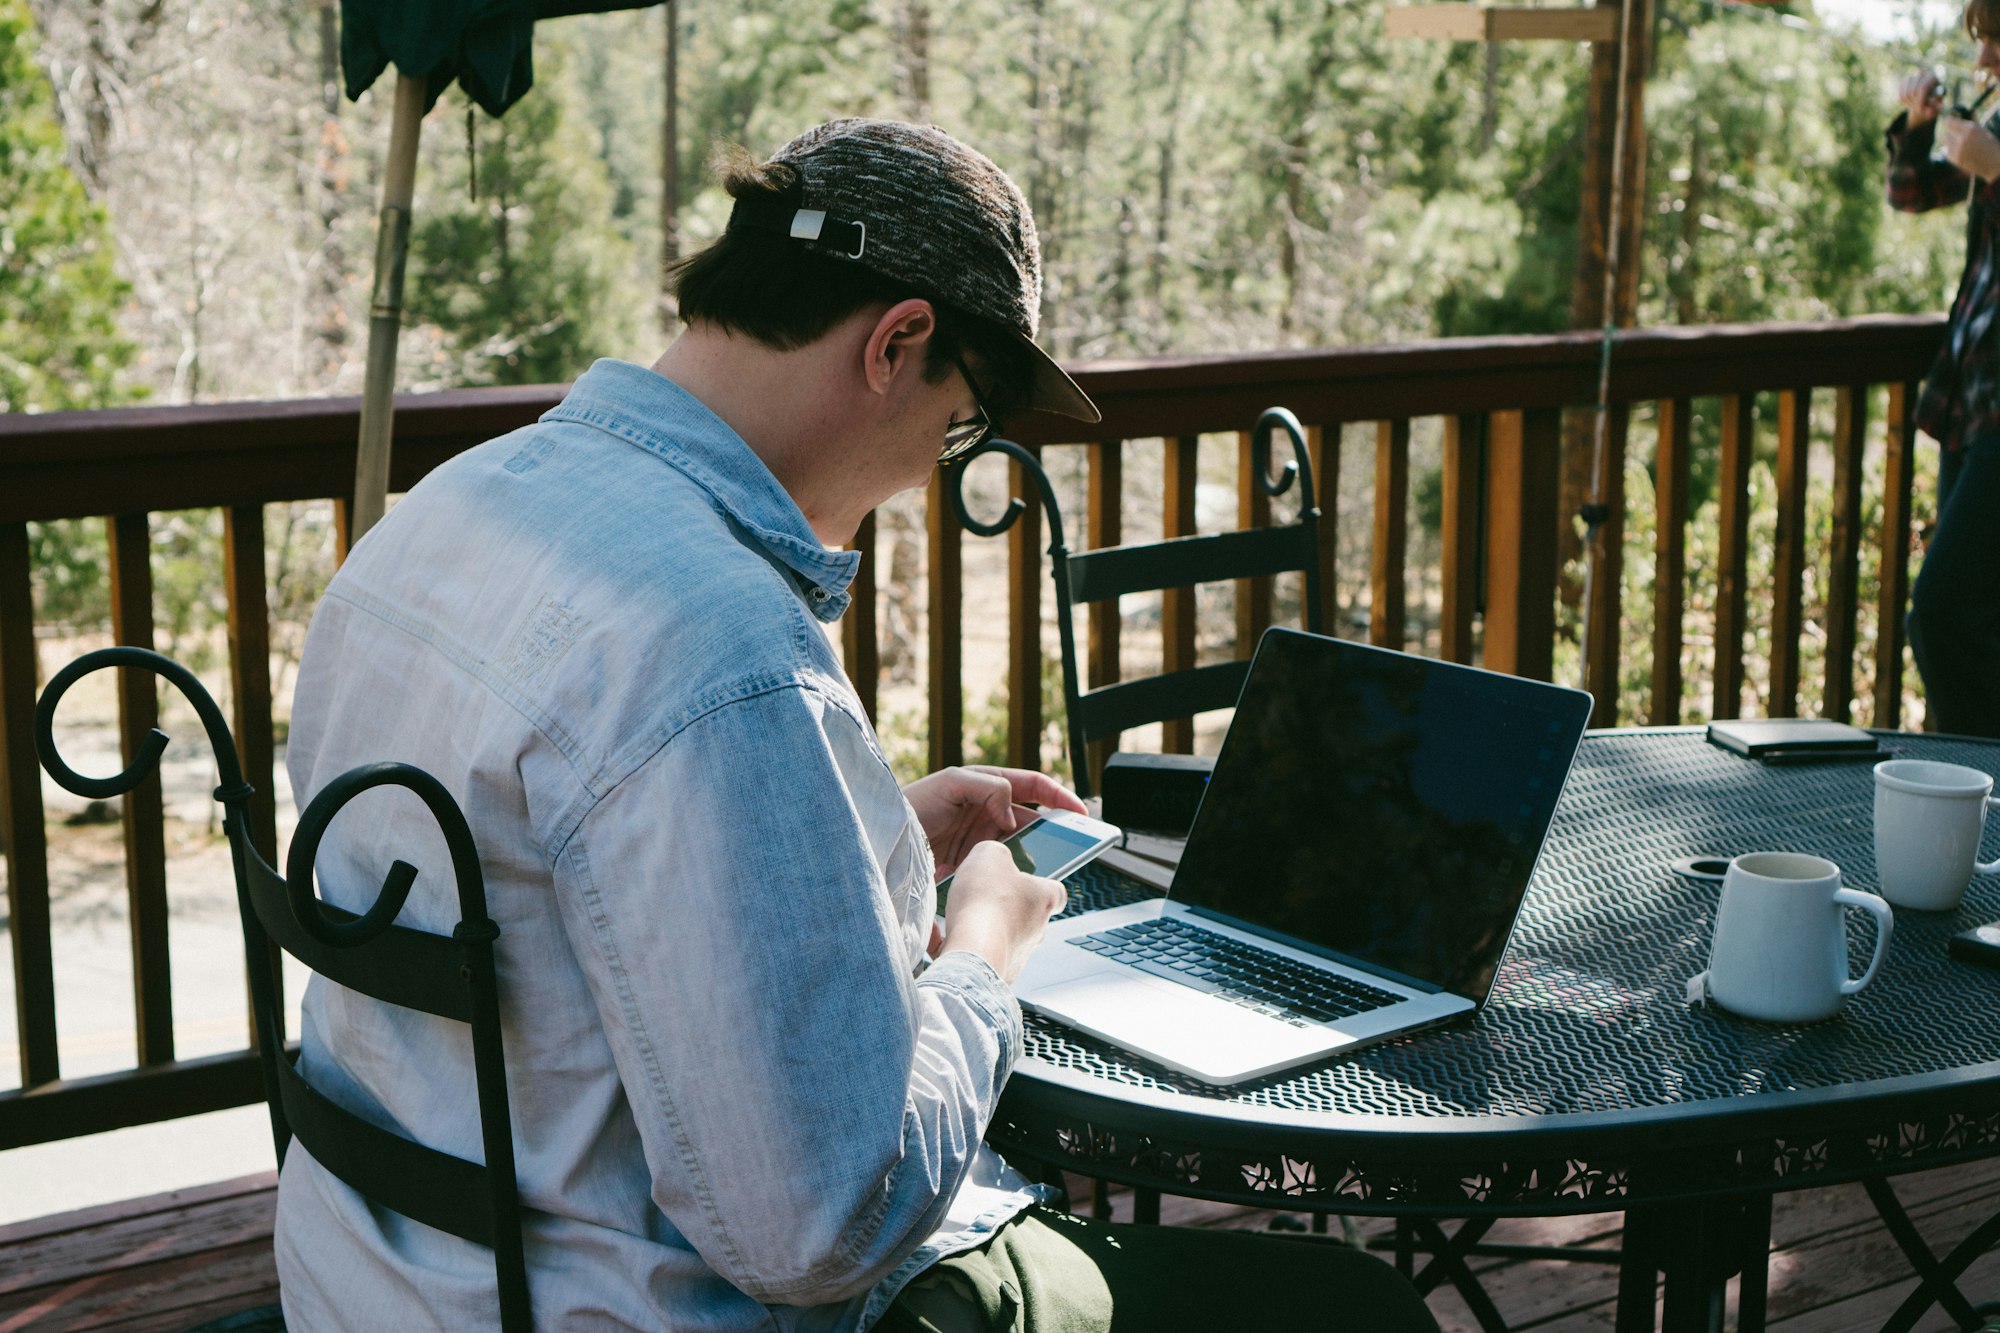 This trip was also a good way to catch up on side work that would usually push off. We decided to setup outside our cabin and enjoy the wilderness while working.